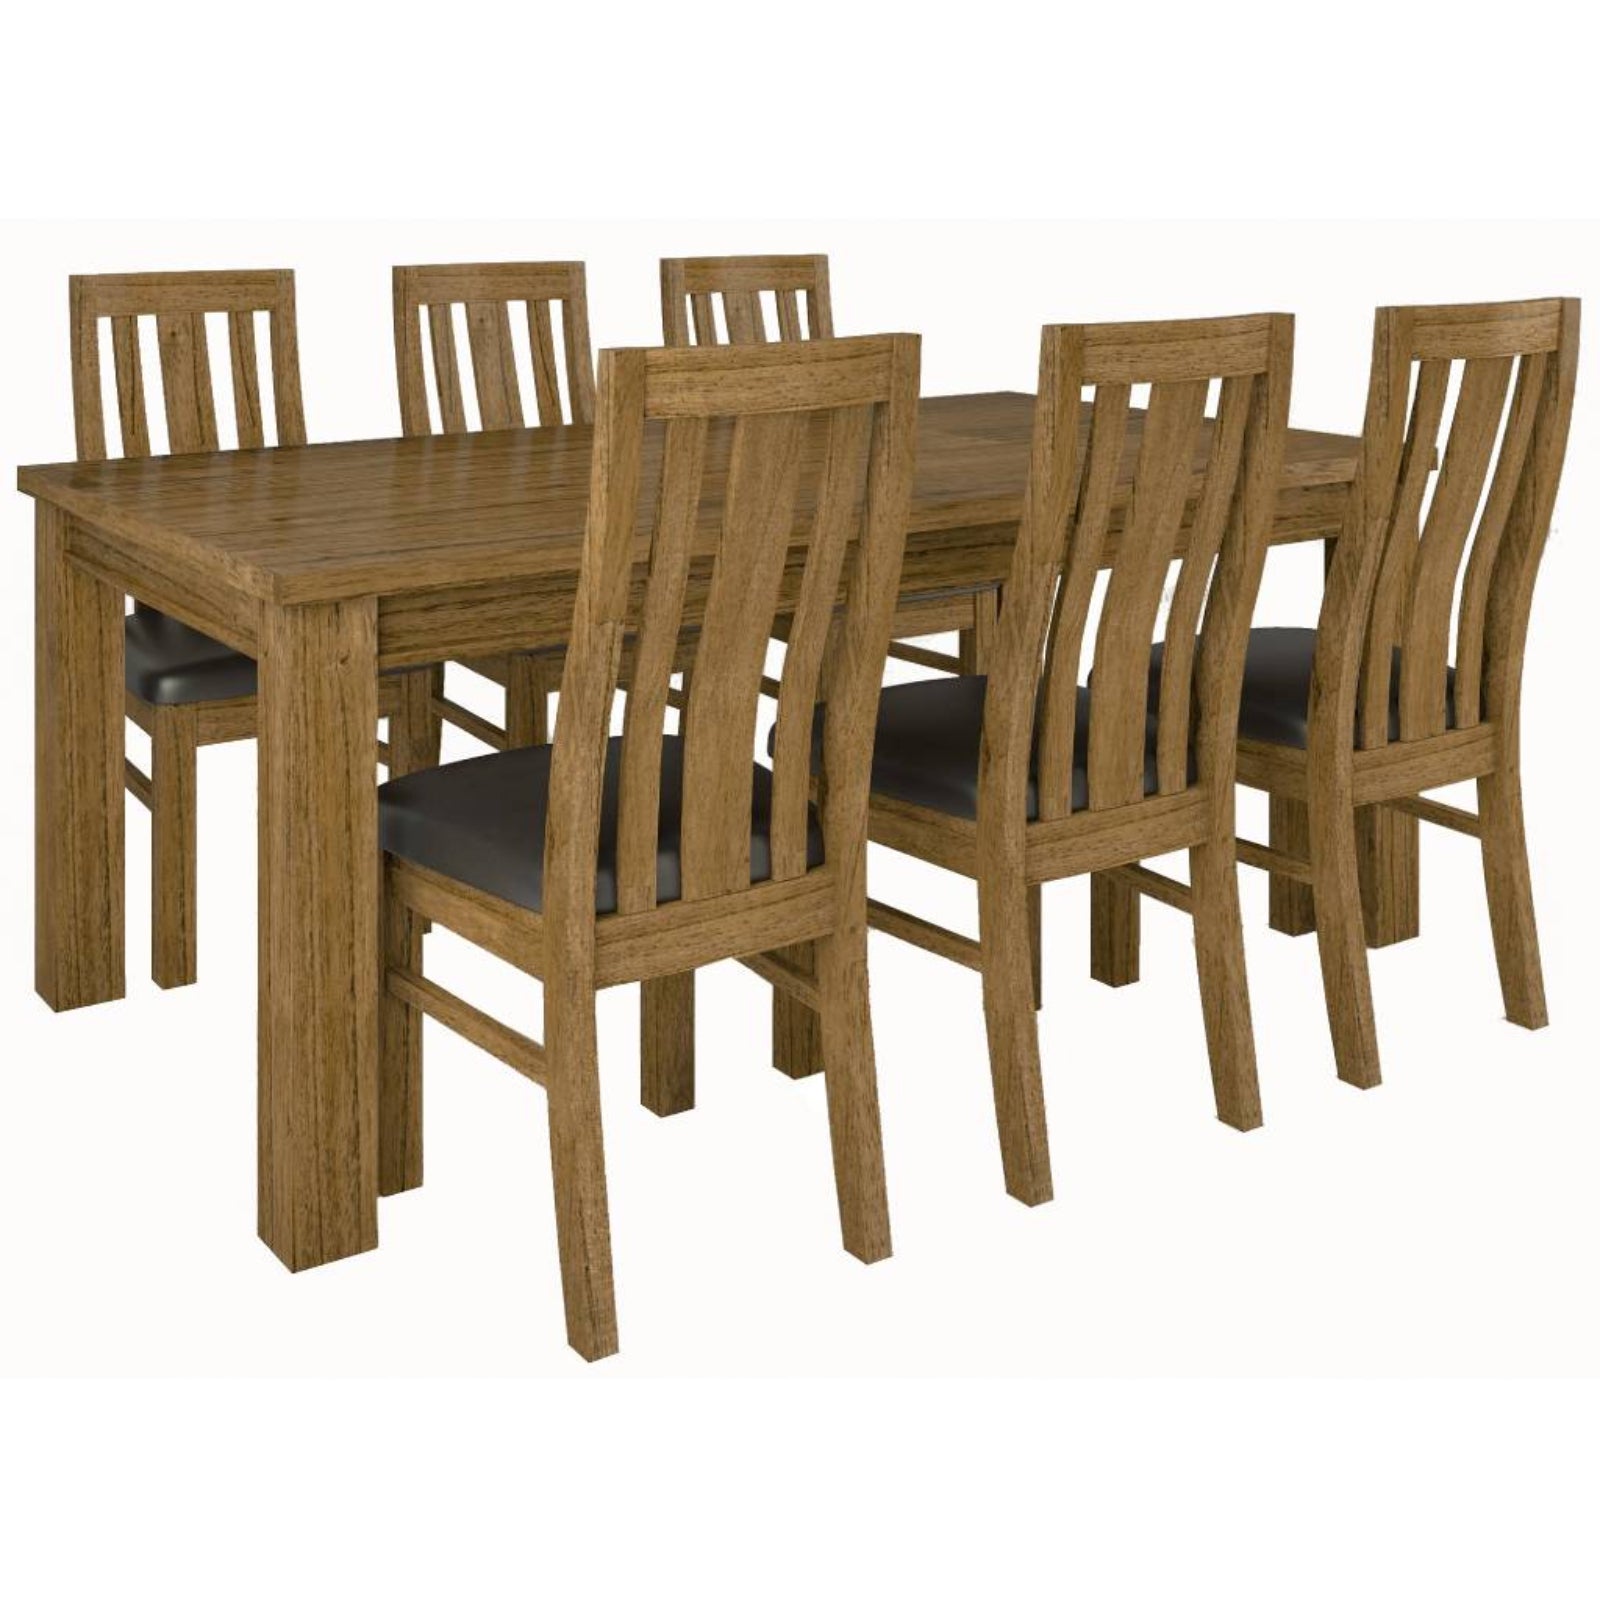 birdsville-7pc-dining-set-190cm-table-6-pu-seat-chair-solid-mt-ash-wood-brown